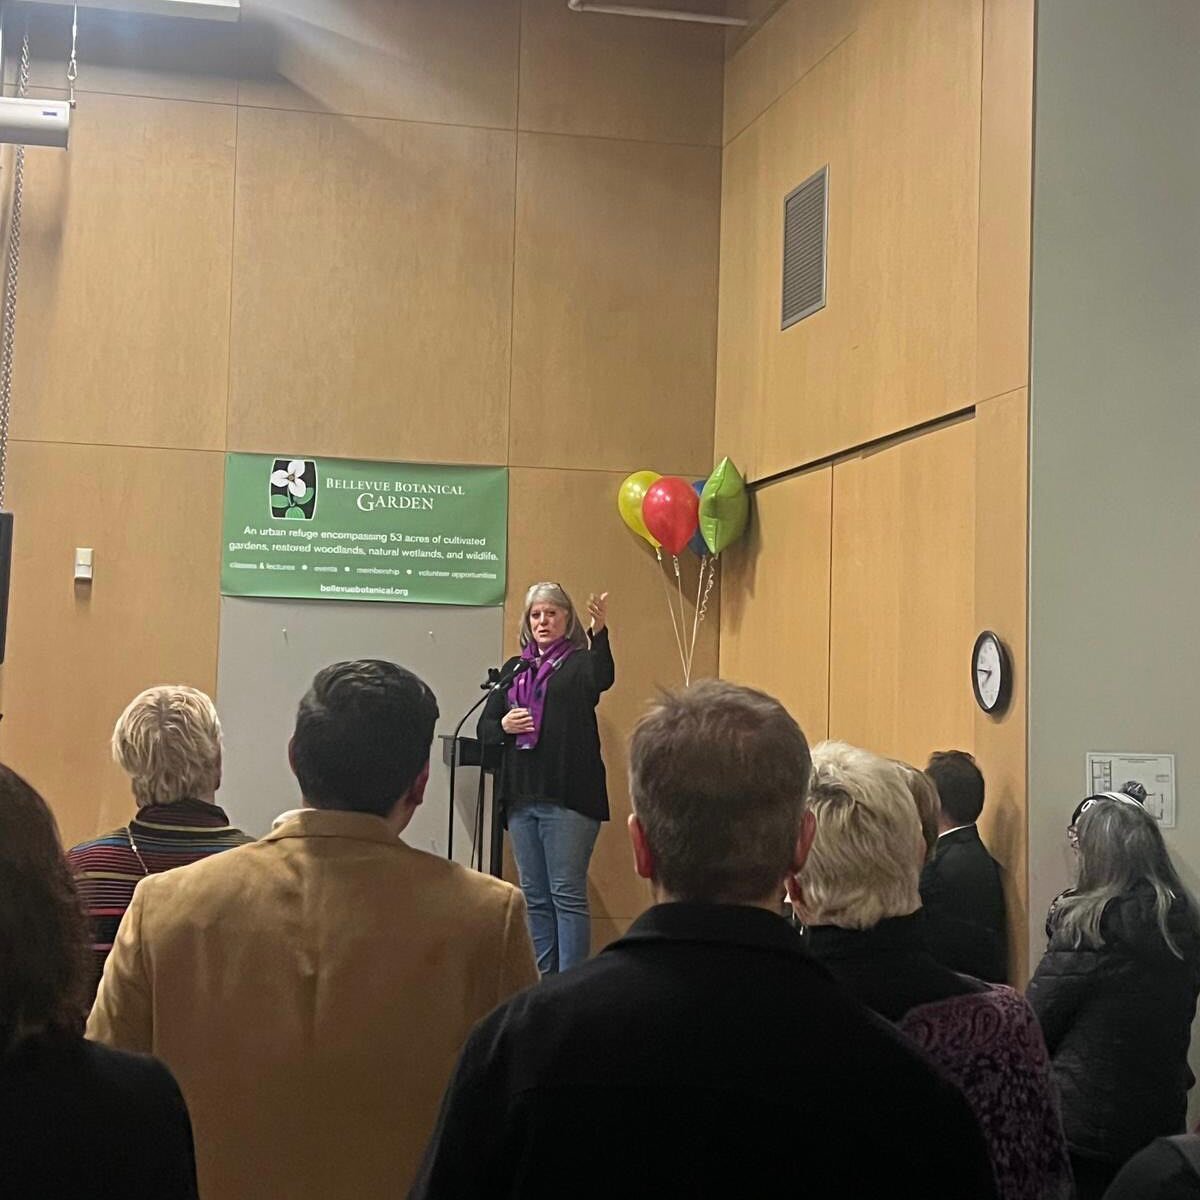 We&rsquo;re very excited and grateful for Doors Open initiative come to fruition. It was a pleasure seeing so many creative organizations gathered to celebrate and support arts and culture in King County.